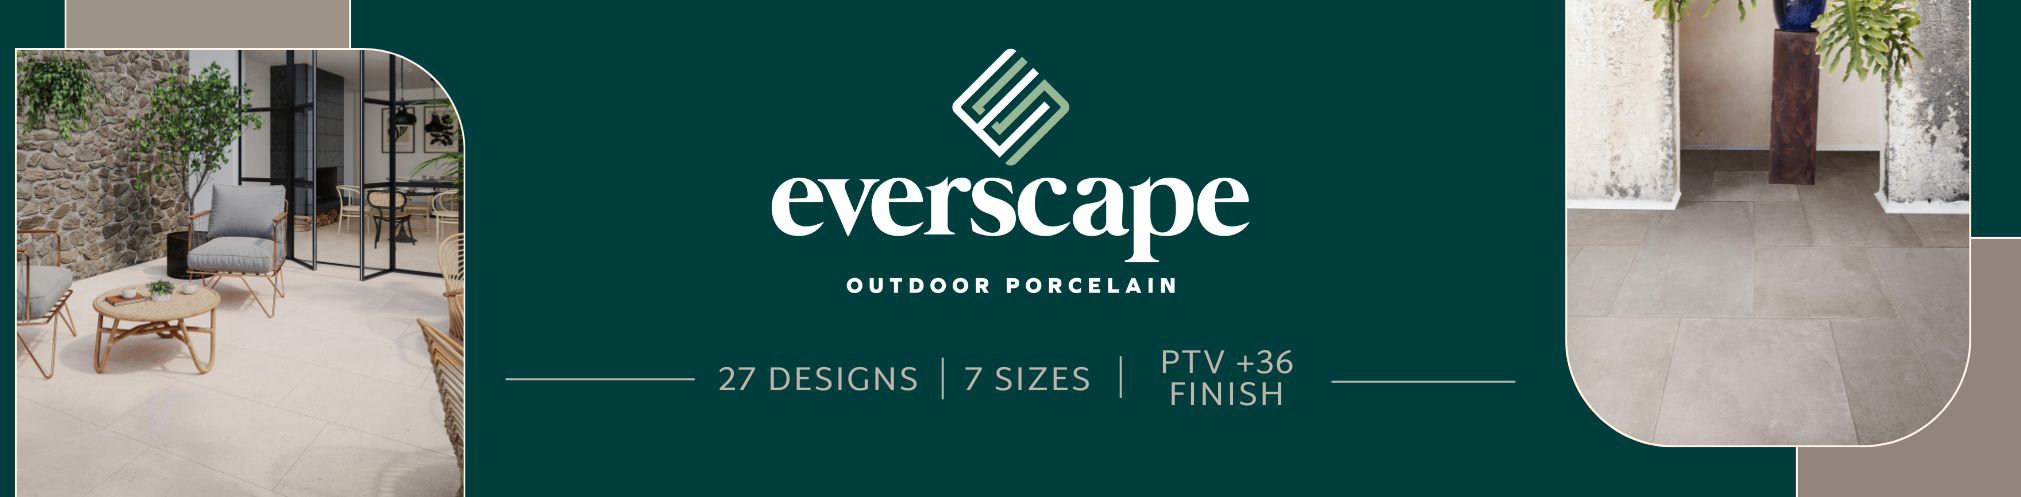 Everscape Email Banner - 5